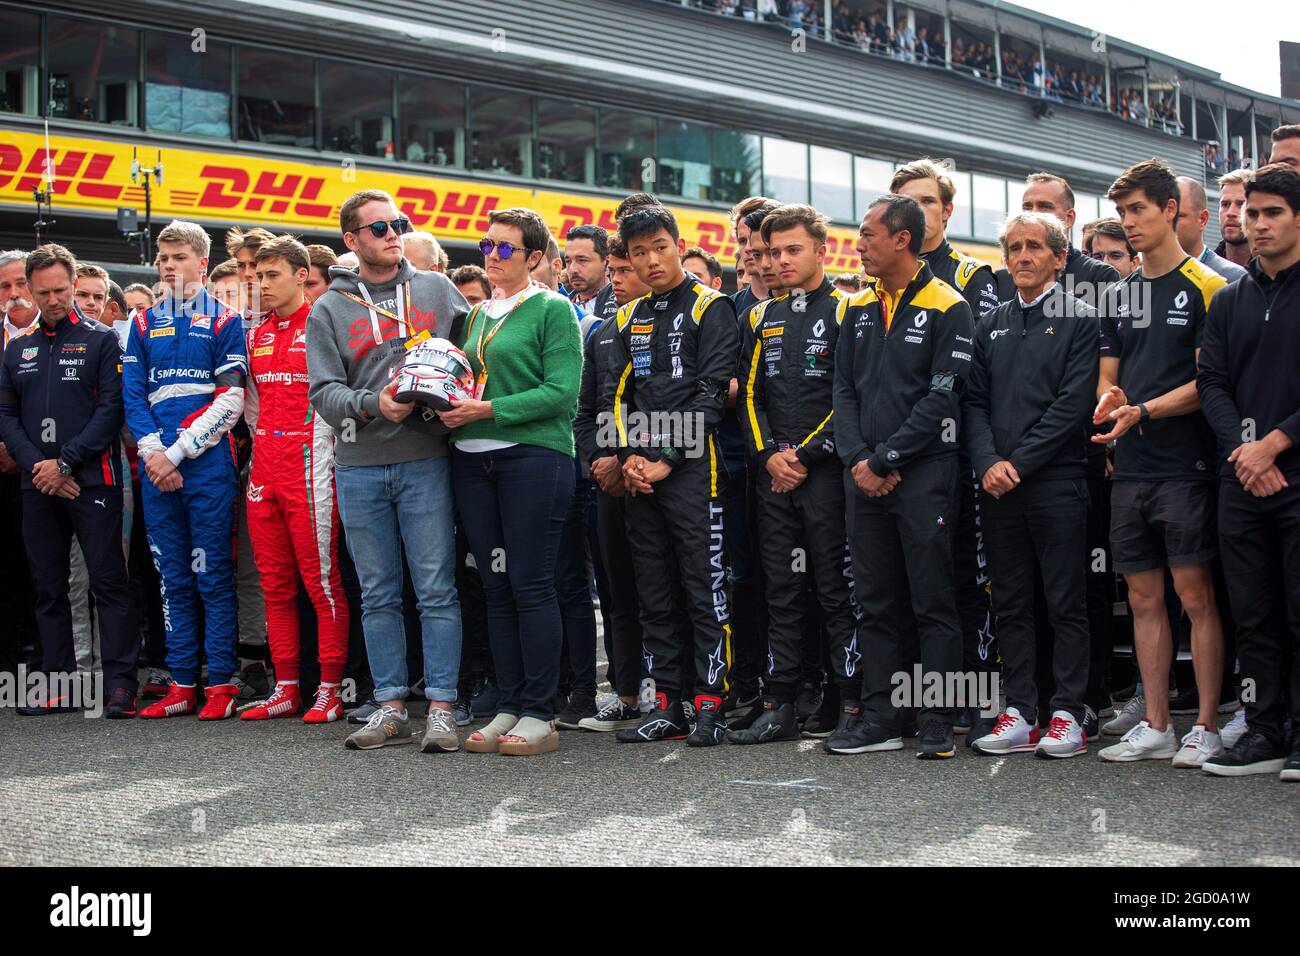 F1, F2, and F3 pay their respects to Anthoine Hubert with his family. Belgian Grand Prix, Sunday 1st September 2019. Spa-Francorchamps, Belgium. Stock Photo